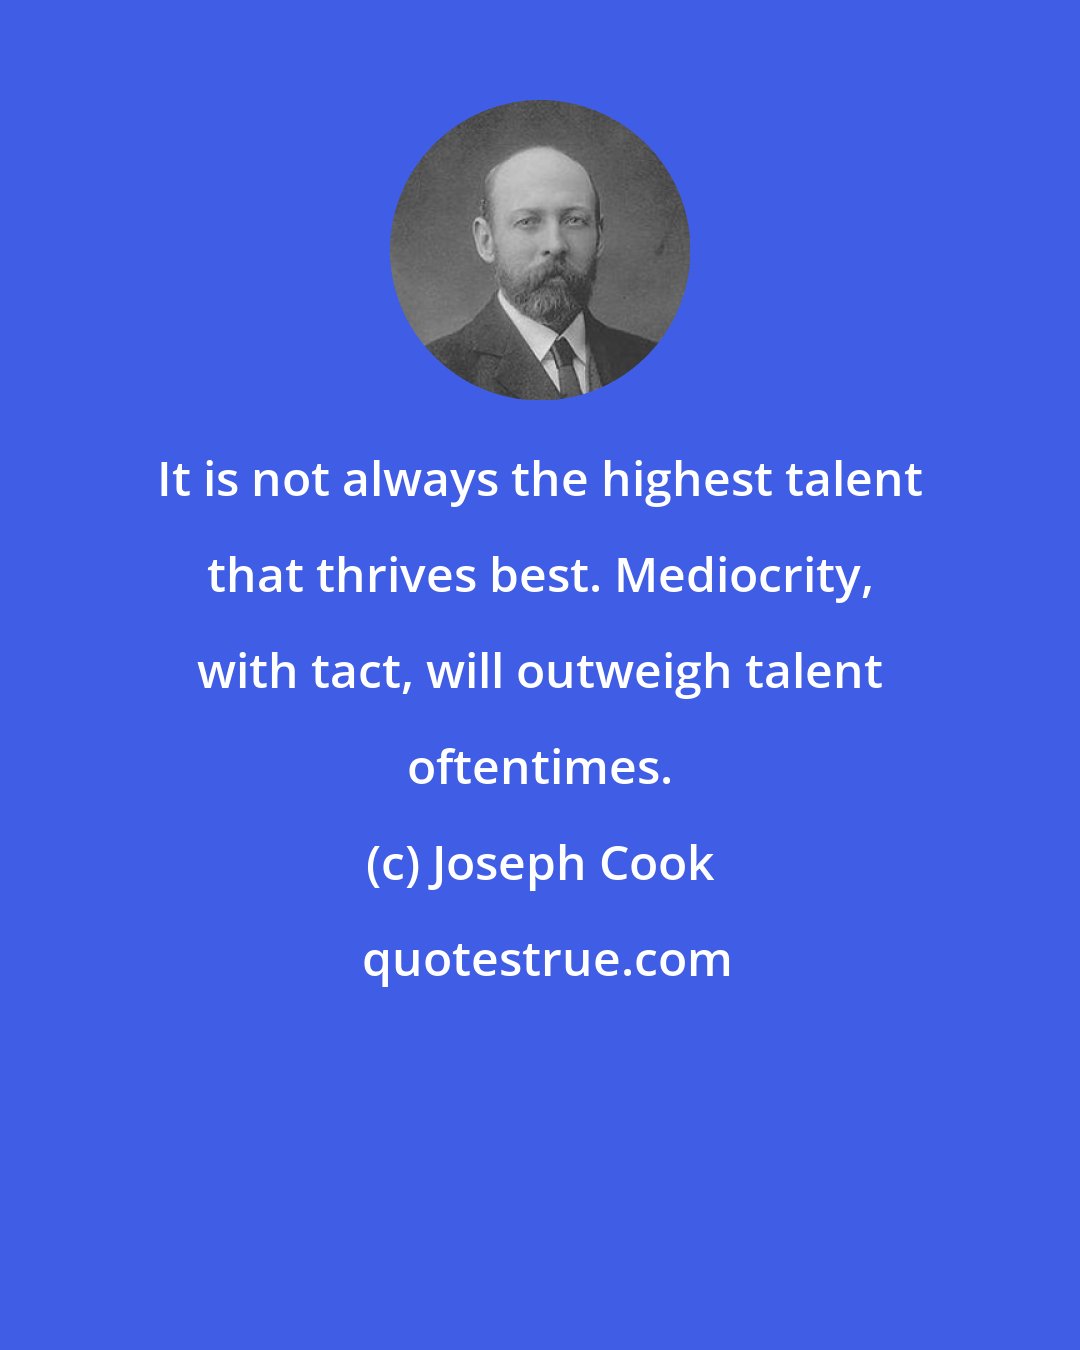 Joseph Cook: It is not always the highest talent that thrives best. Mediocrity, with tact, will outweigh talent oftentimes.